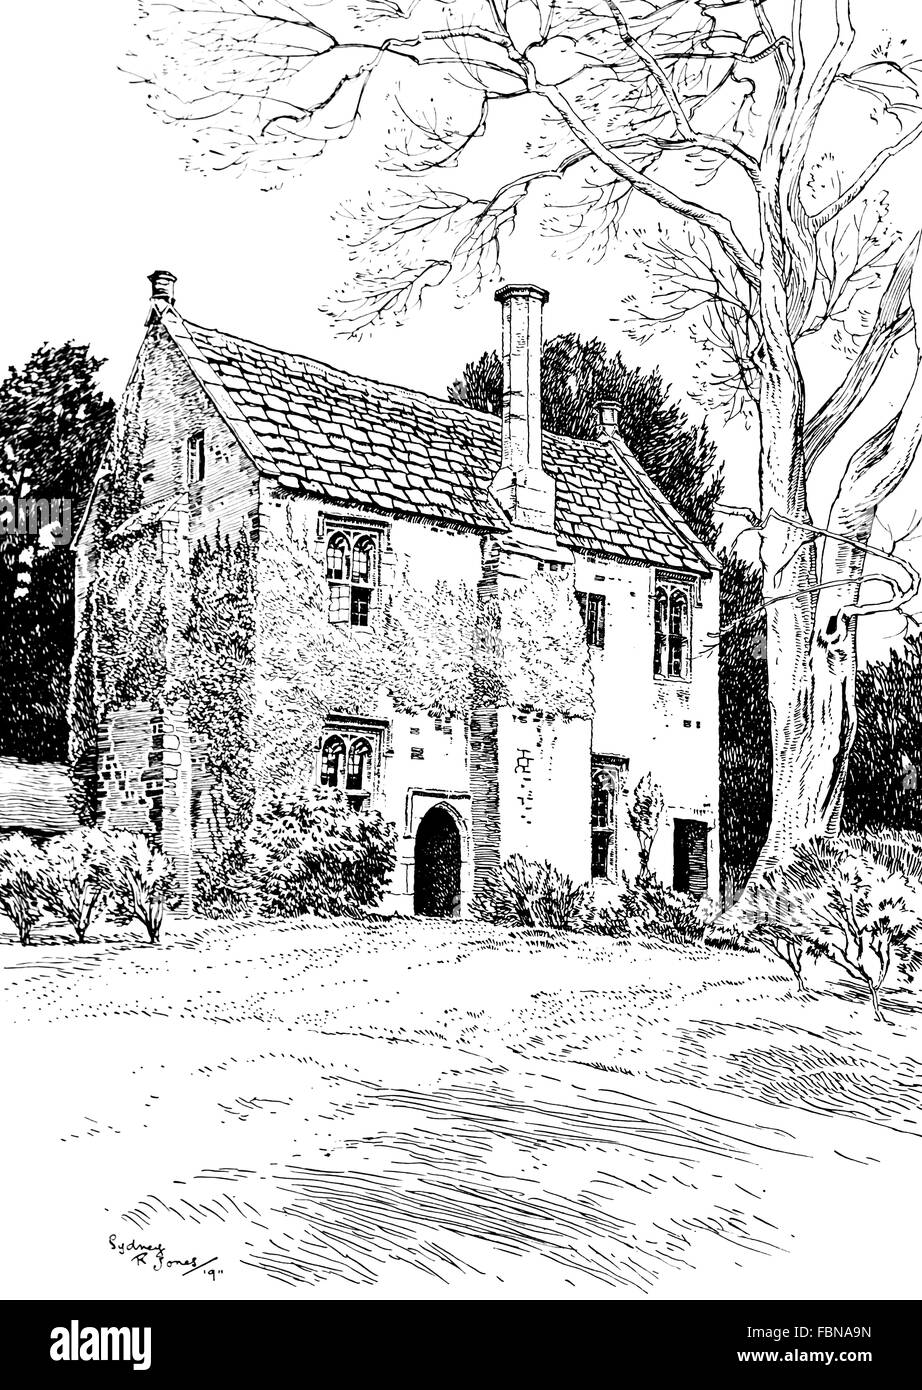 UK, England, Dorset, Trent, The Chantry, old 1400s house covered in creeper, 1911 line illustration by, Sydney R Jones Stock Photo